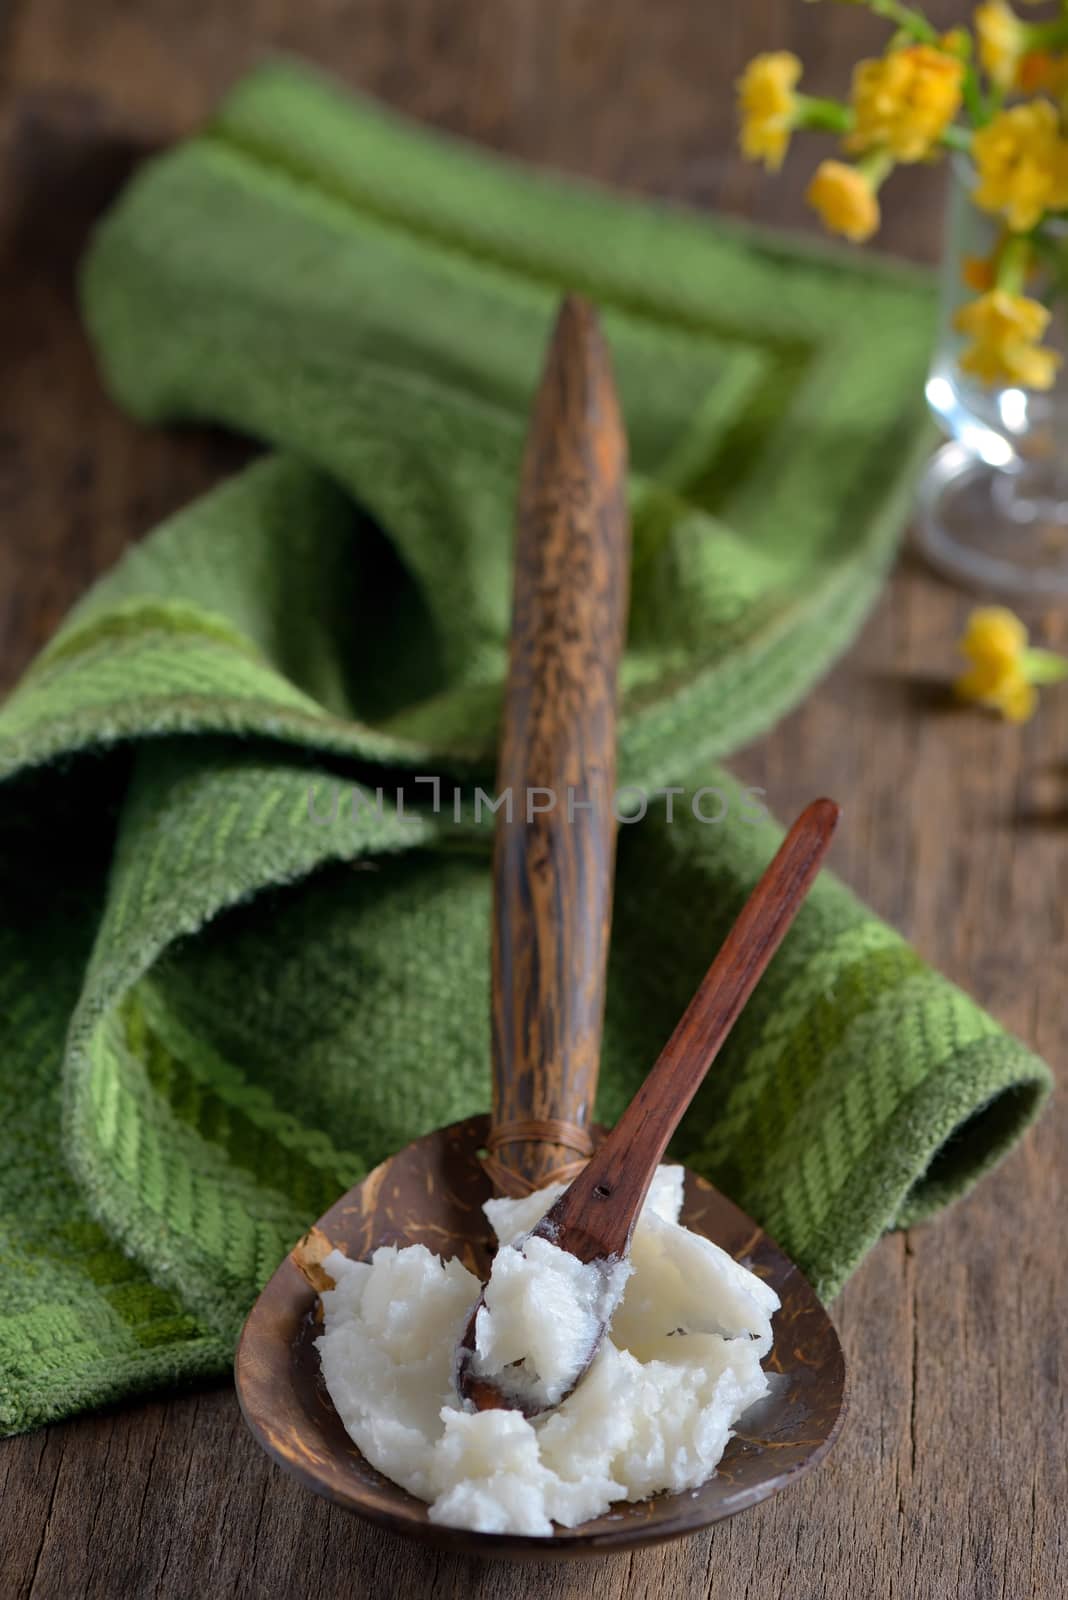 coconut oil on the wooden spoon